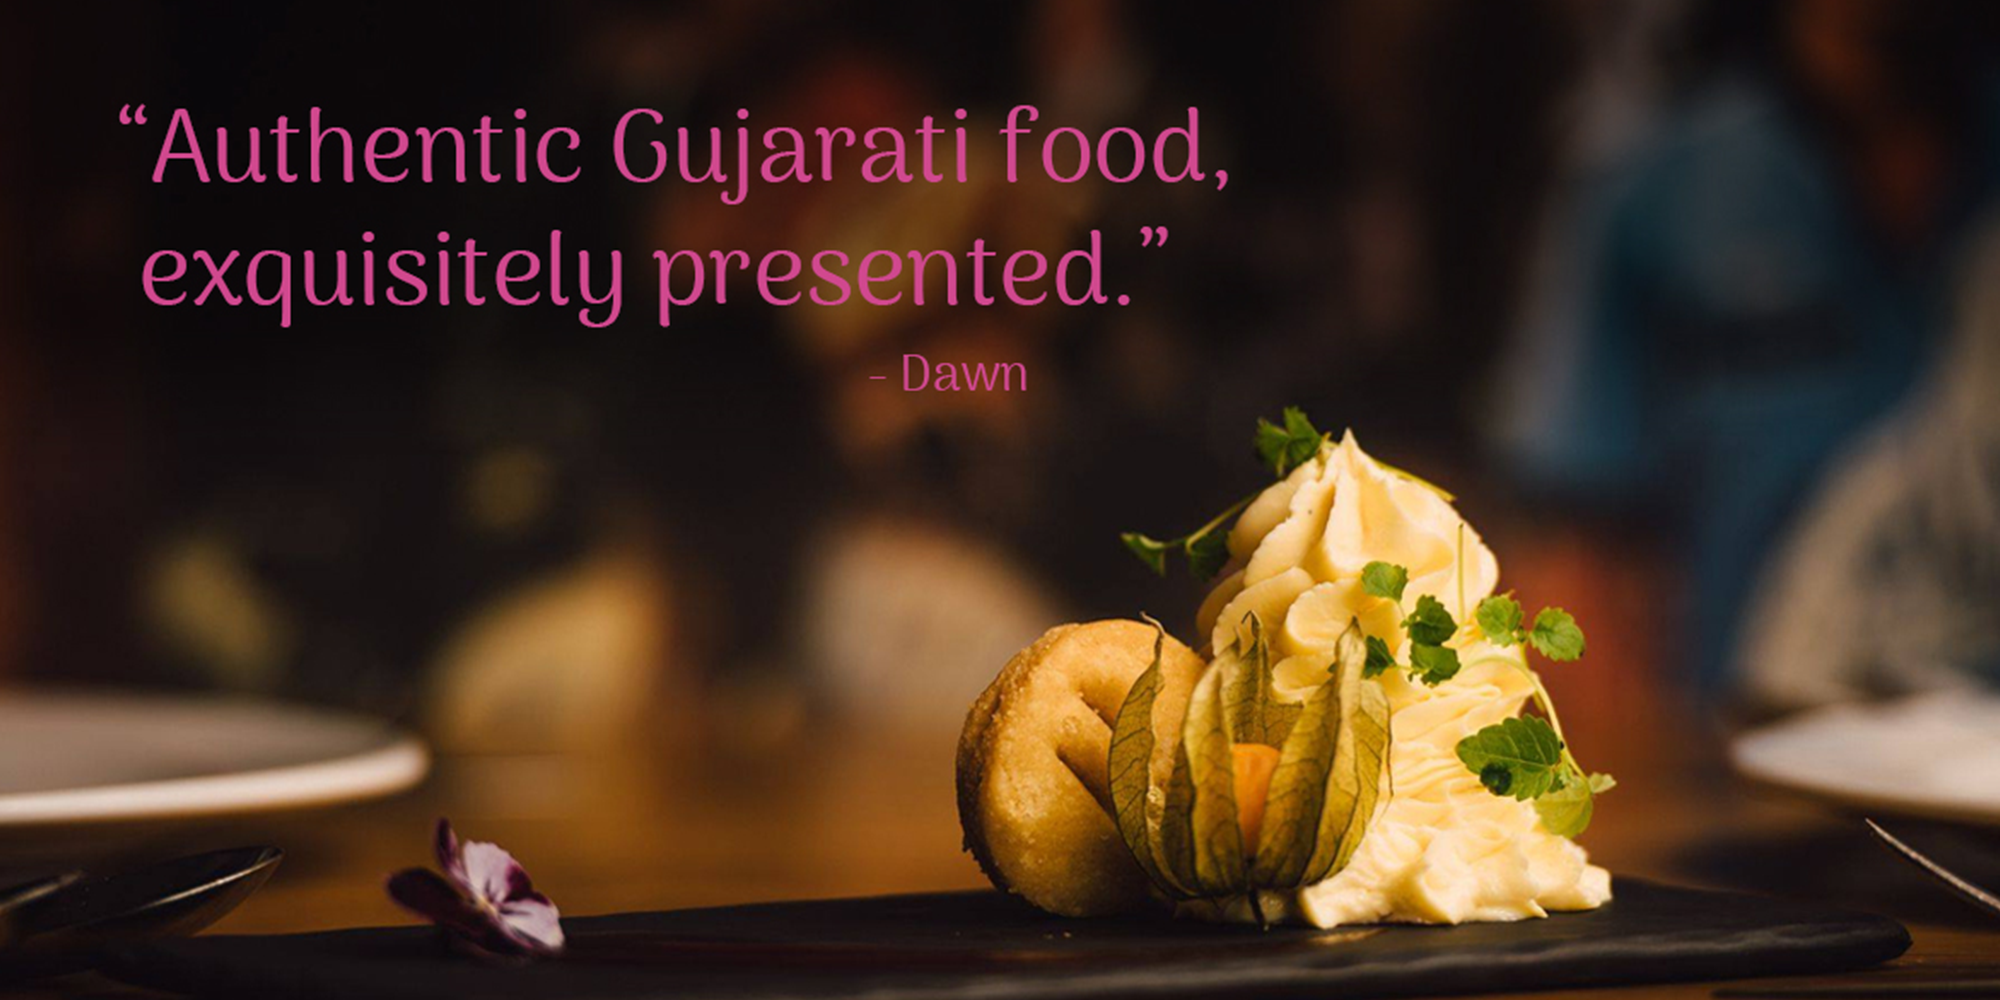 A plate of food with the text 'Authentic Gujarati food, exquisitely presented.' above it